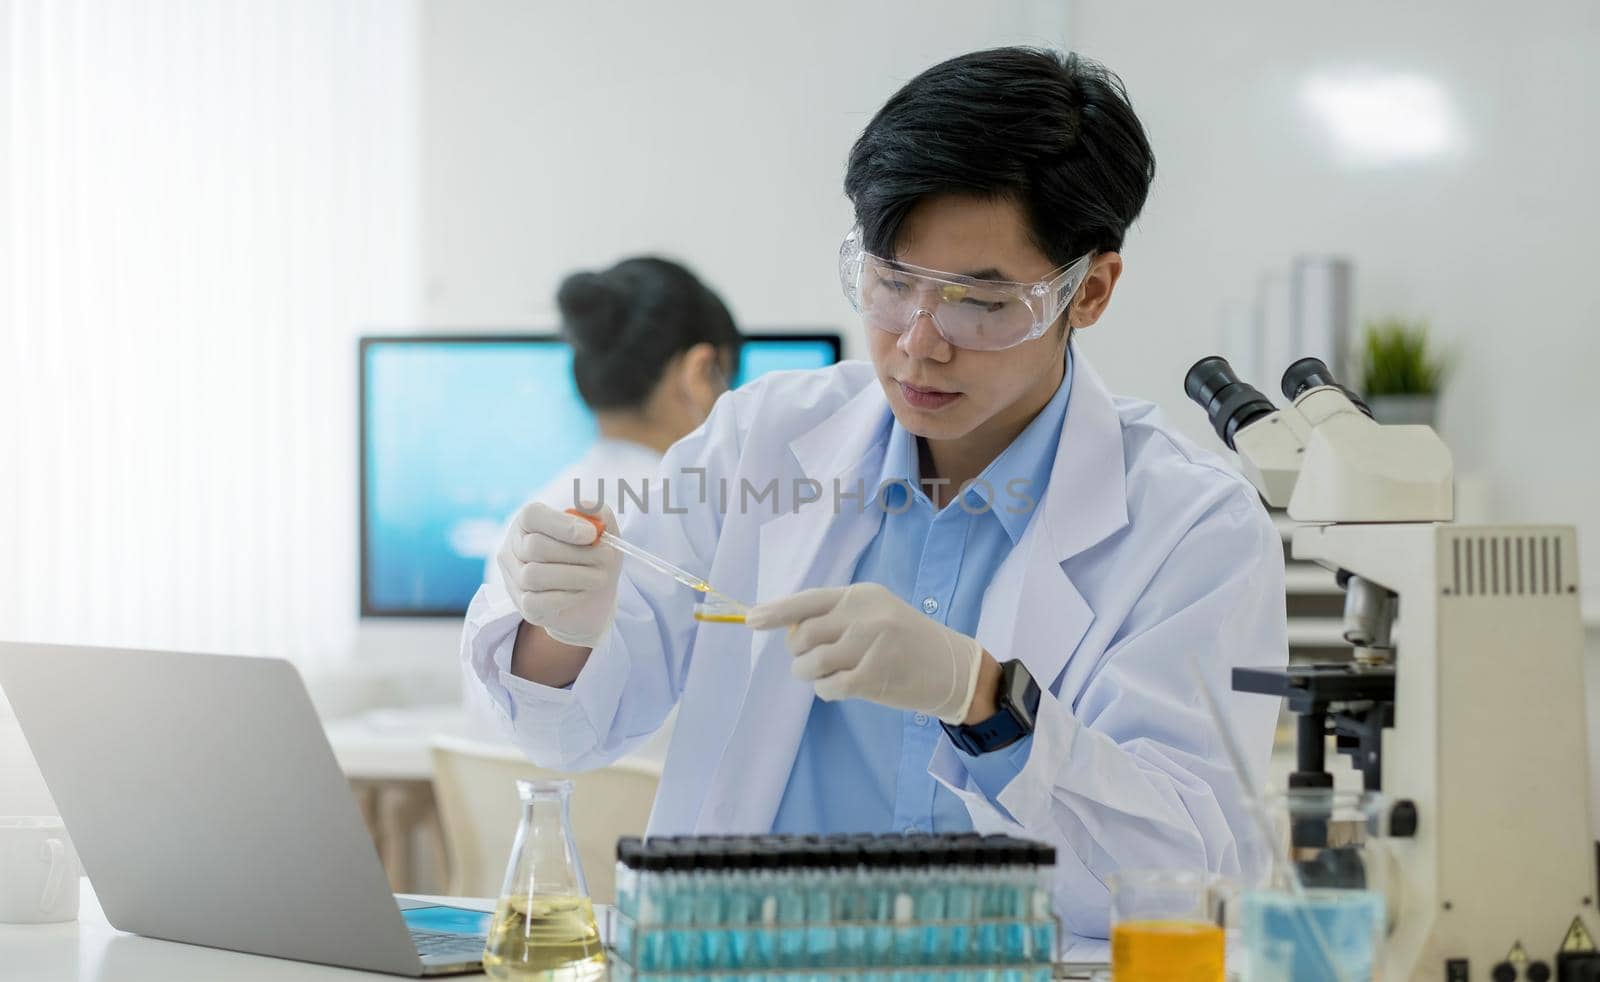 Medical Research Laboratory: Portrait of a Handsome Male Scientist Using Digital Tablet Computer, Analysing Liquid Biochemicals in a Laboratory Flask. by wichayada